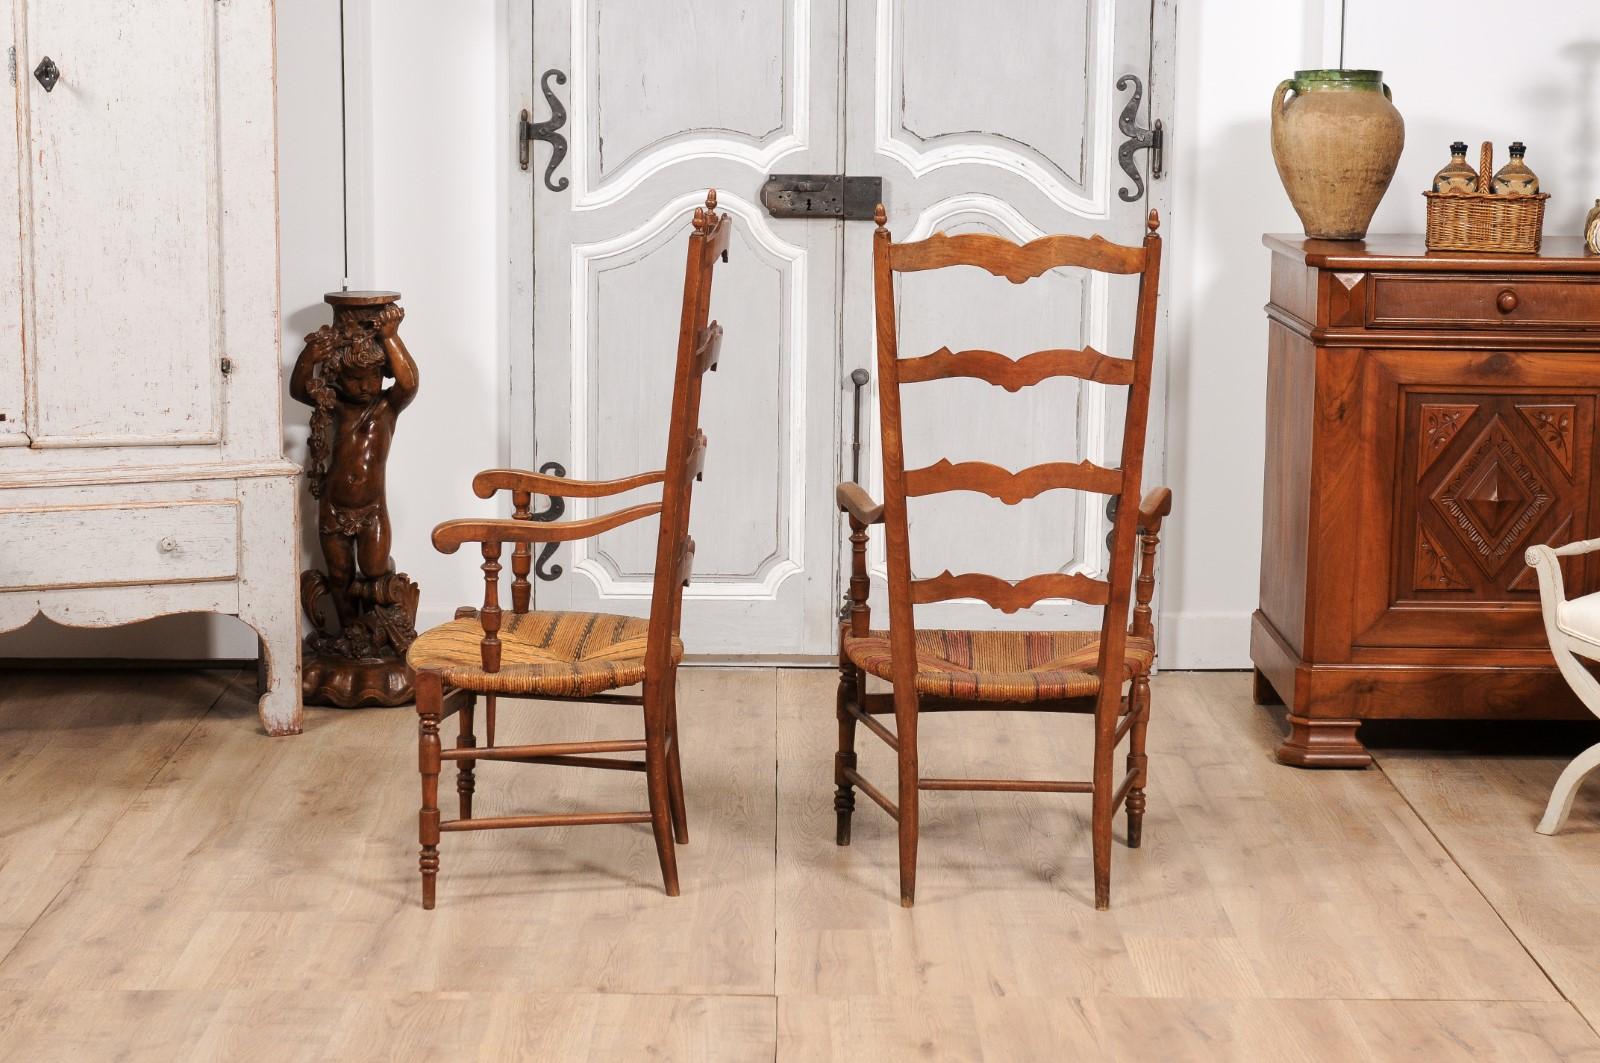 French 1890s Fruitwood Ladder Back Chairs with Straw Seats and Turned Legs For Sale 3